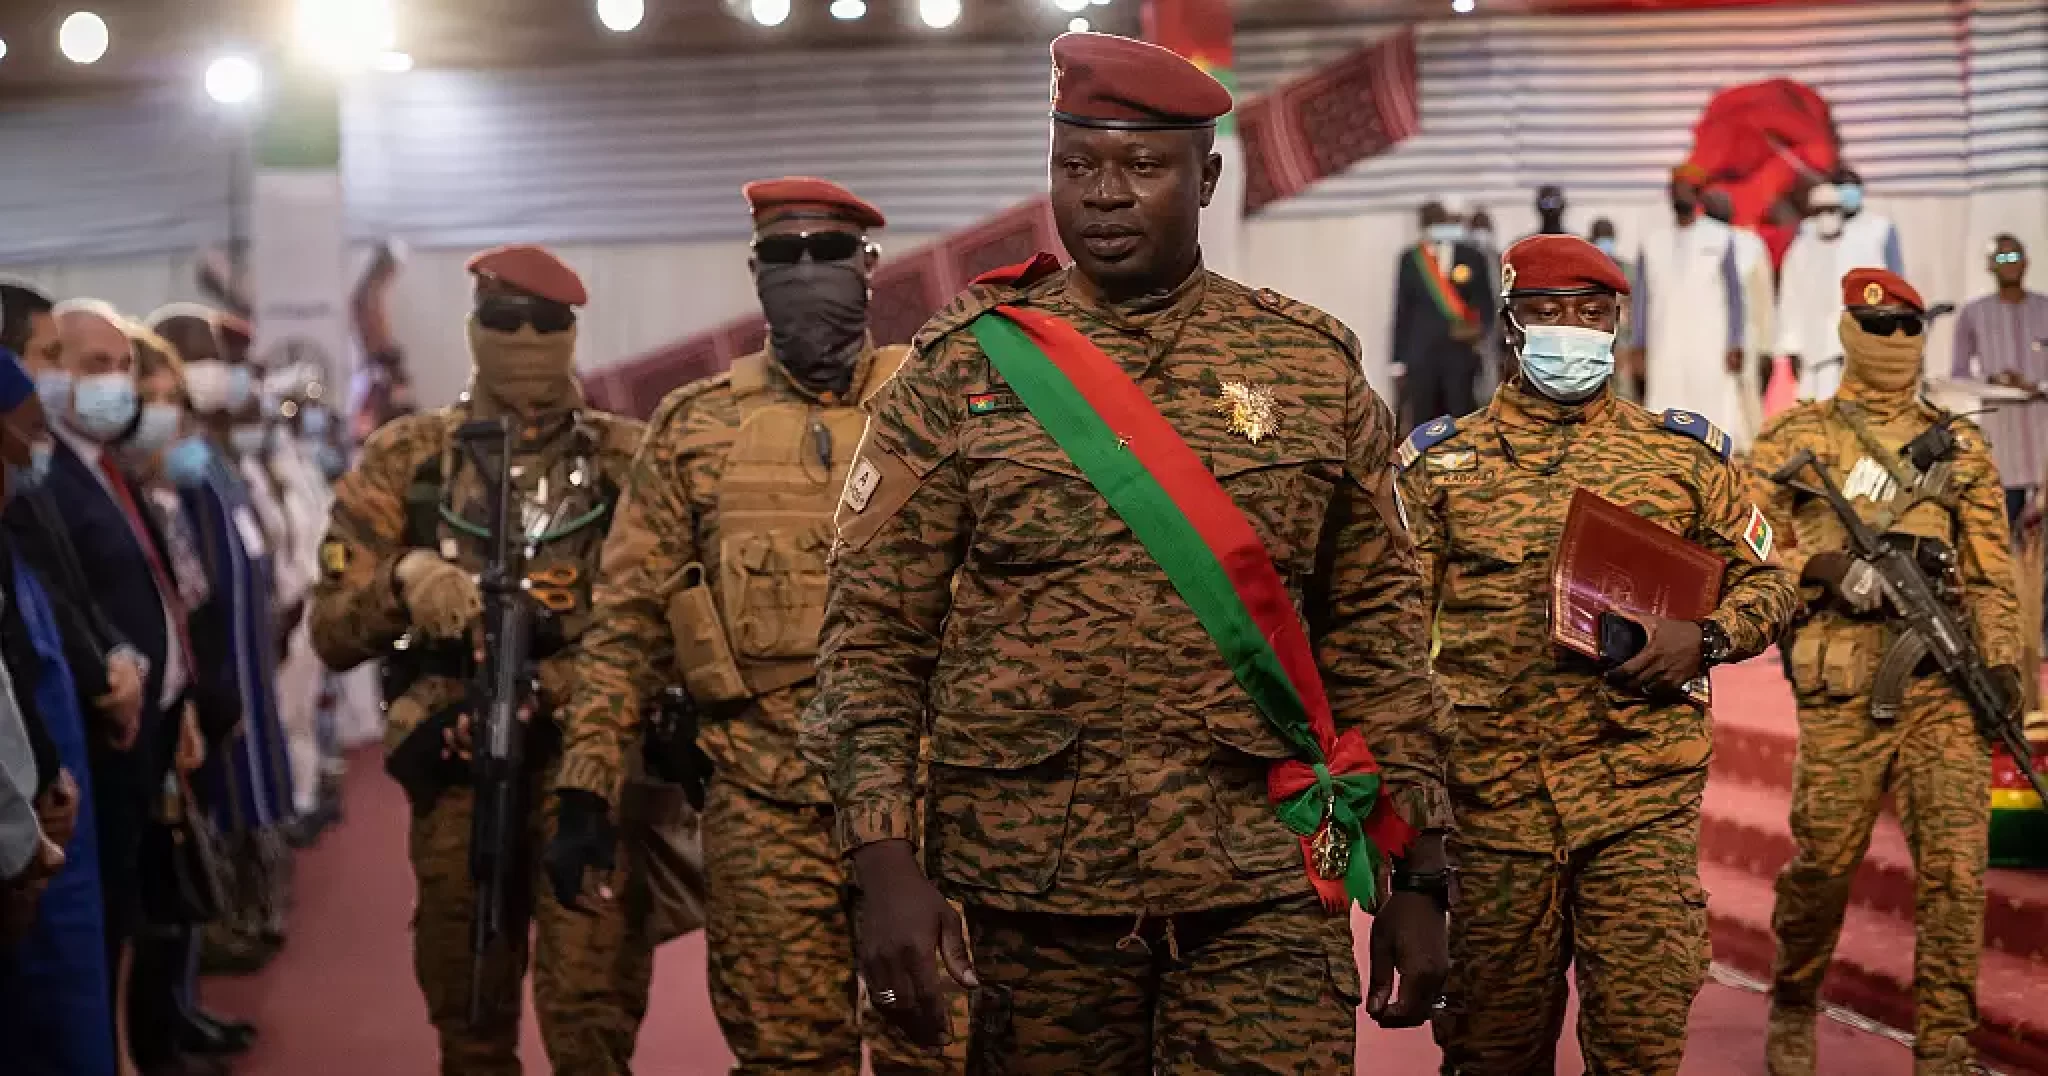 Burkina Faso’s Military Leader Overthrown in Country’s 2nd Coup This Year